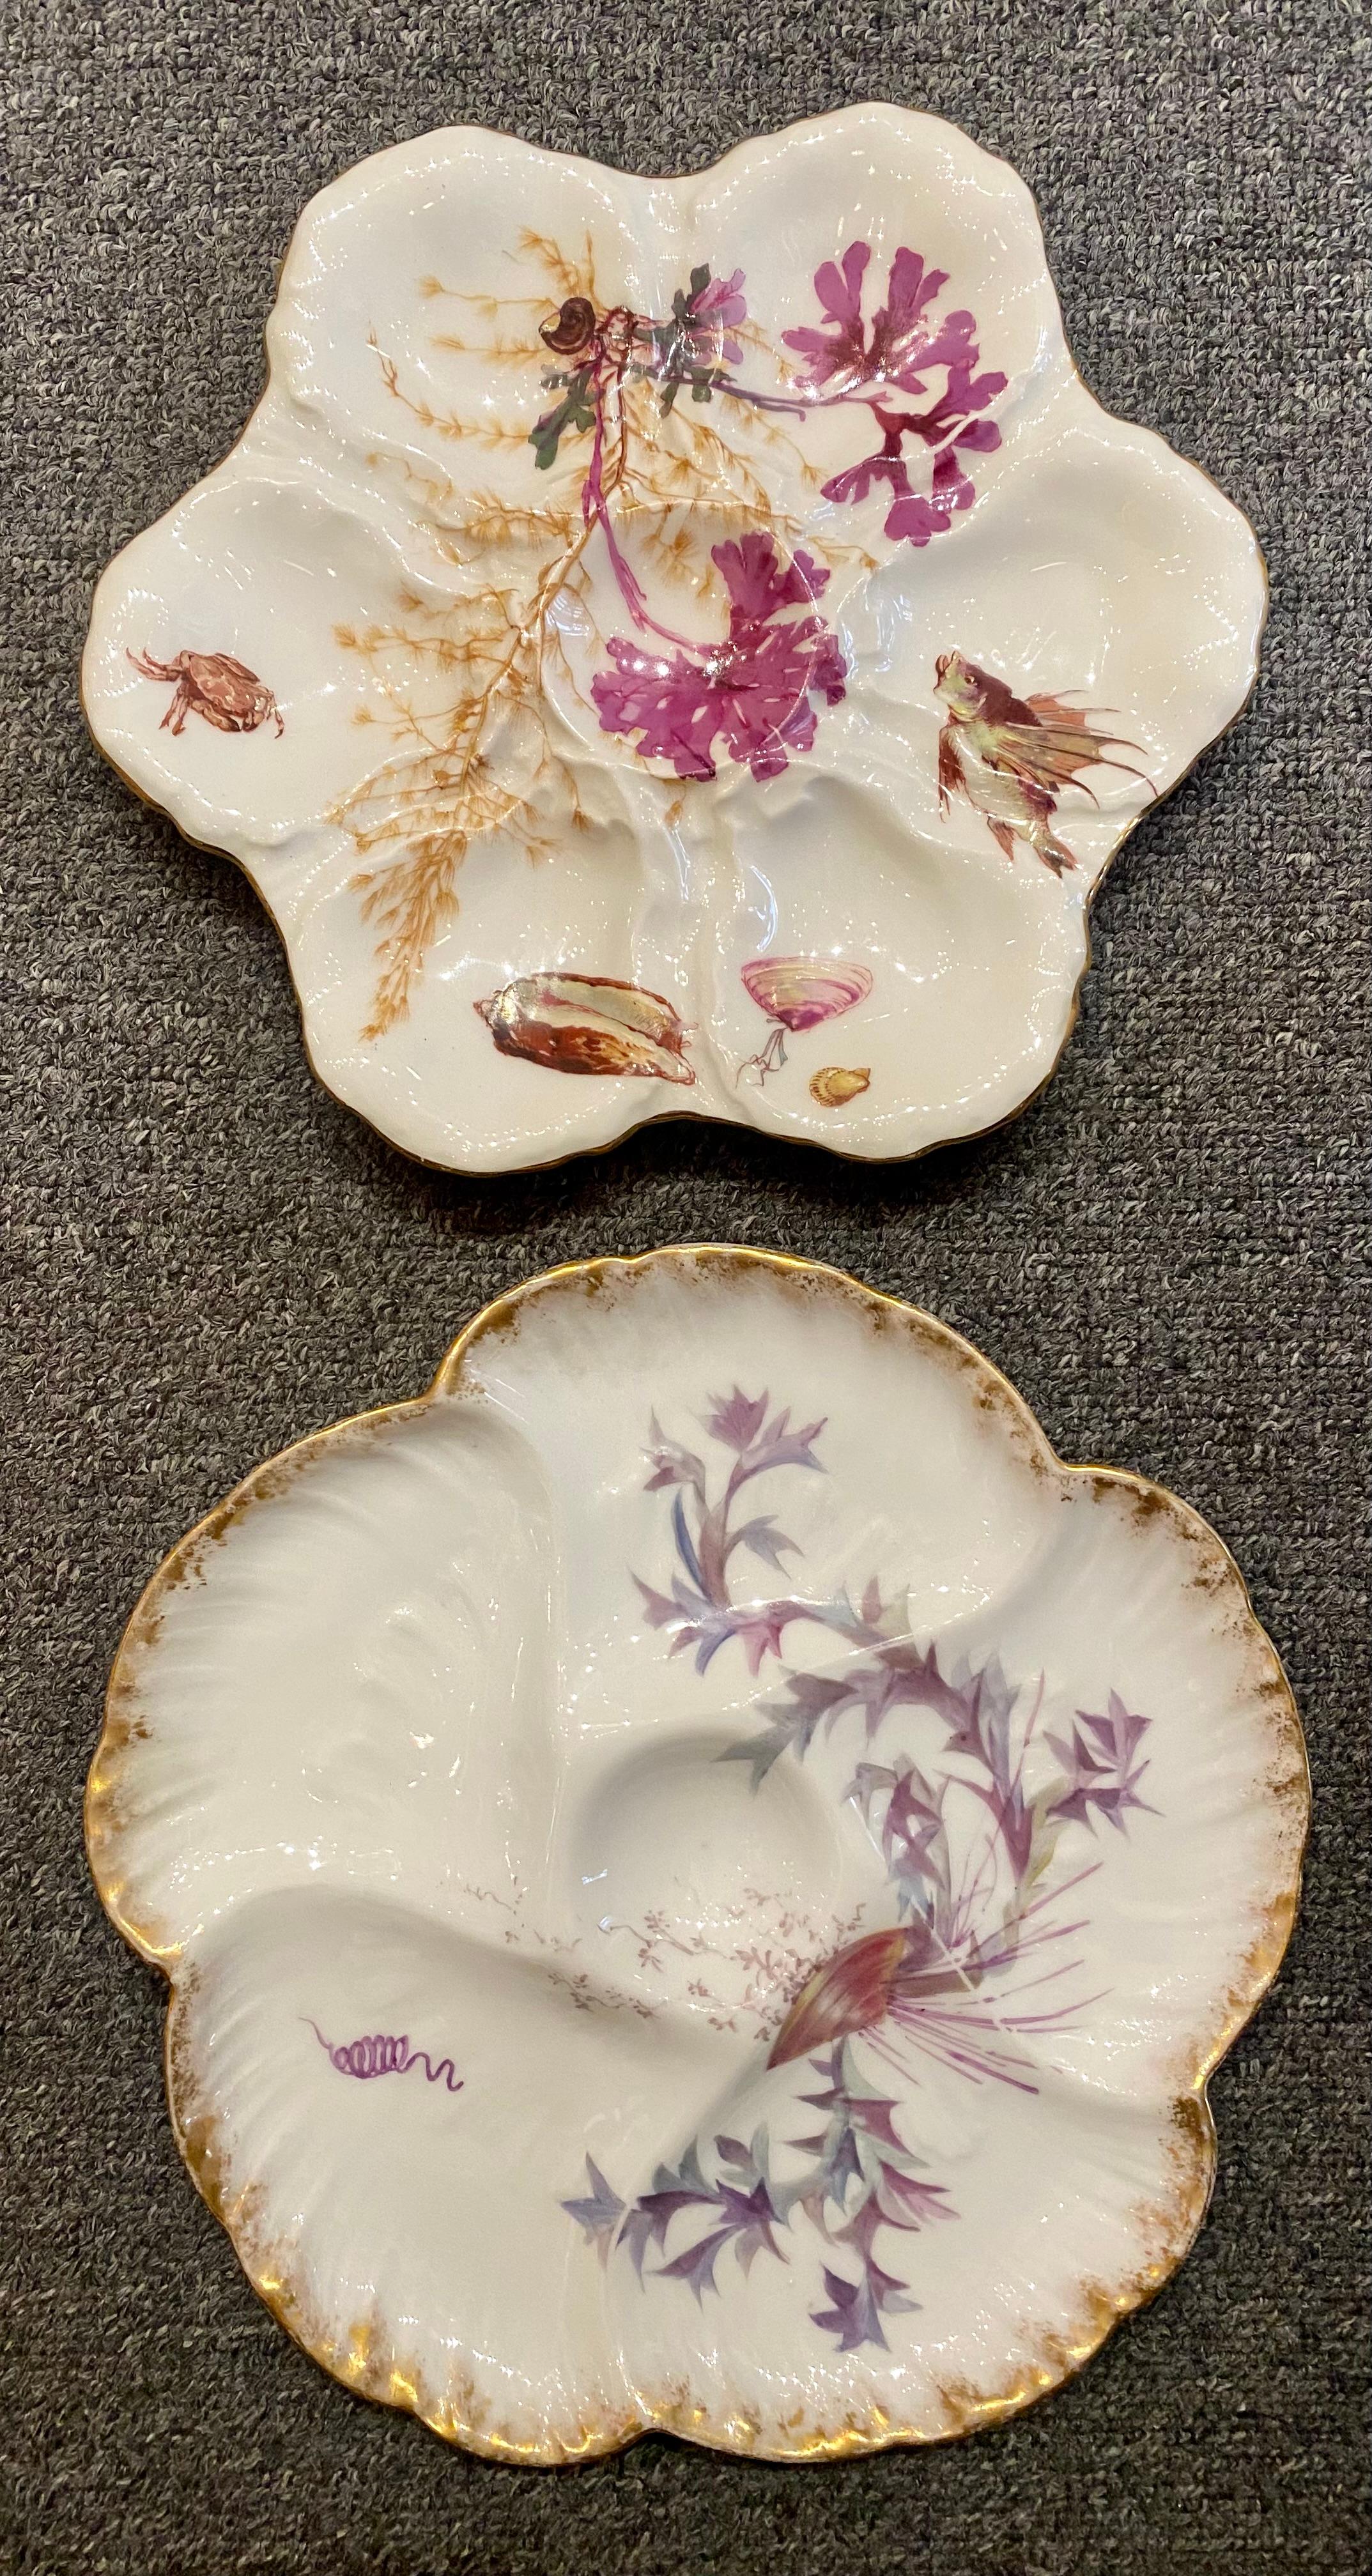 *Special Listing* Pair Antique Oyster Plates Sold Together for a Client.  Discounted Price already reflected on this listing.

1. Antique French Porcelain Sea Life Oyster Plate Signed 